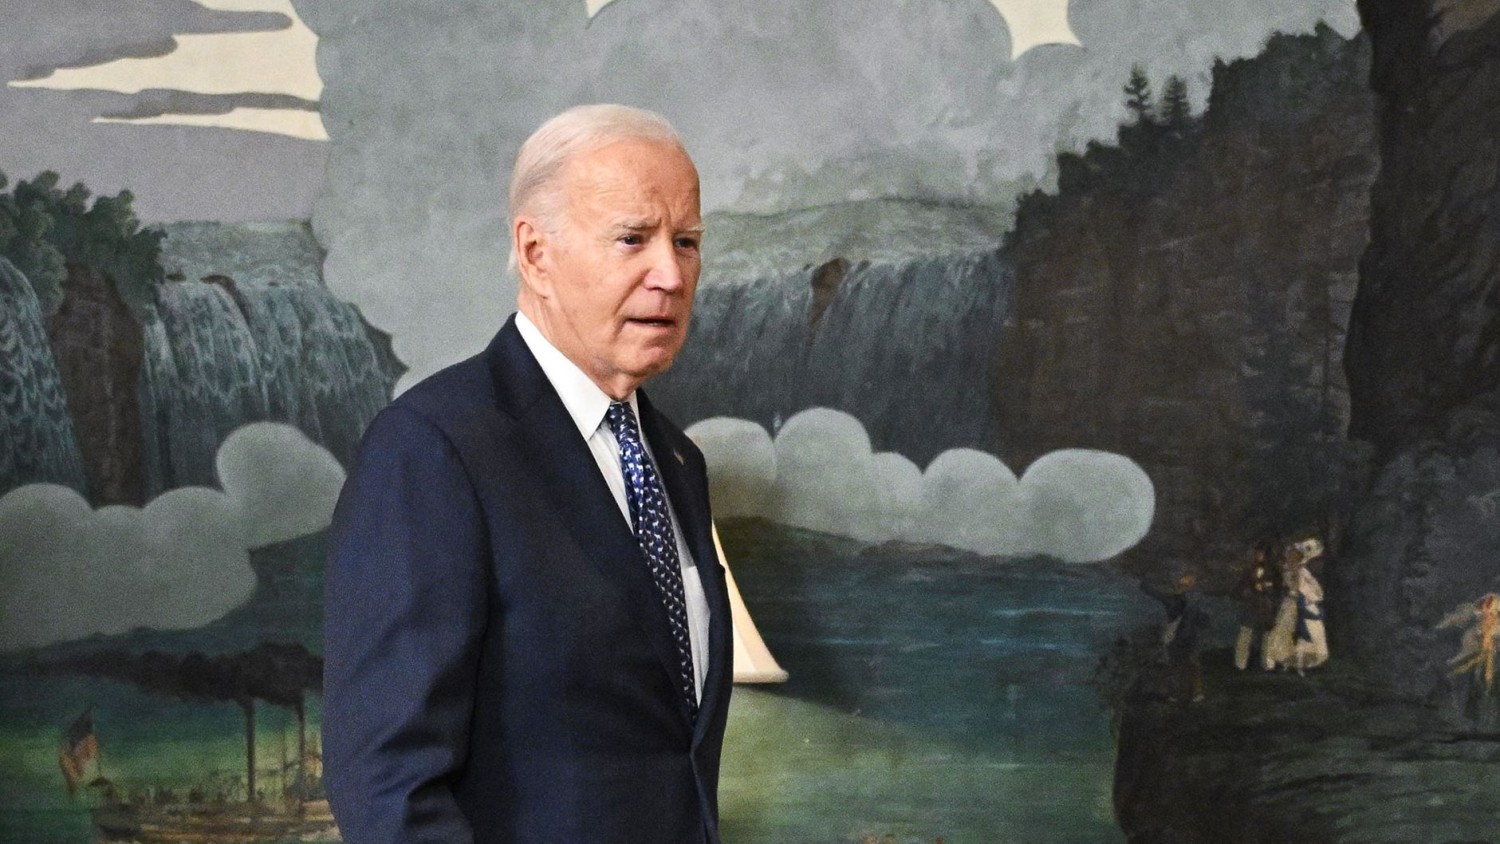 Biden defends his memory in surprise speech after special counsel report